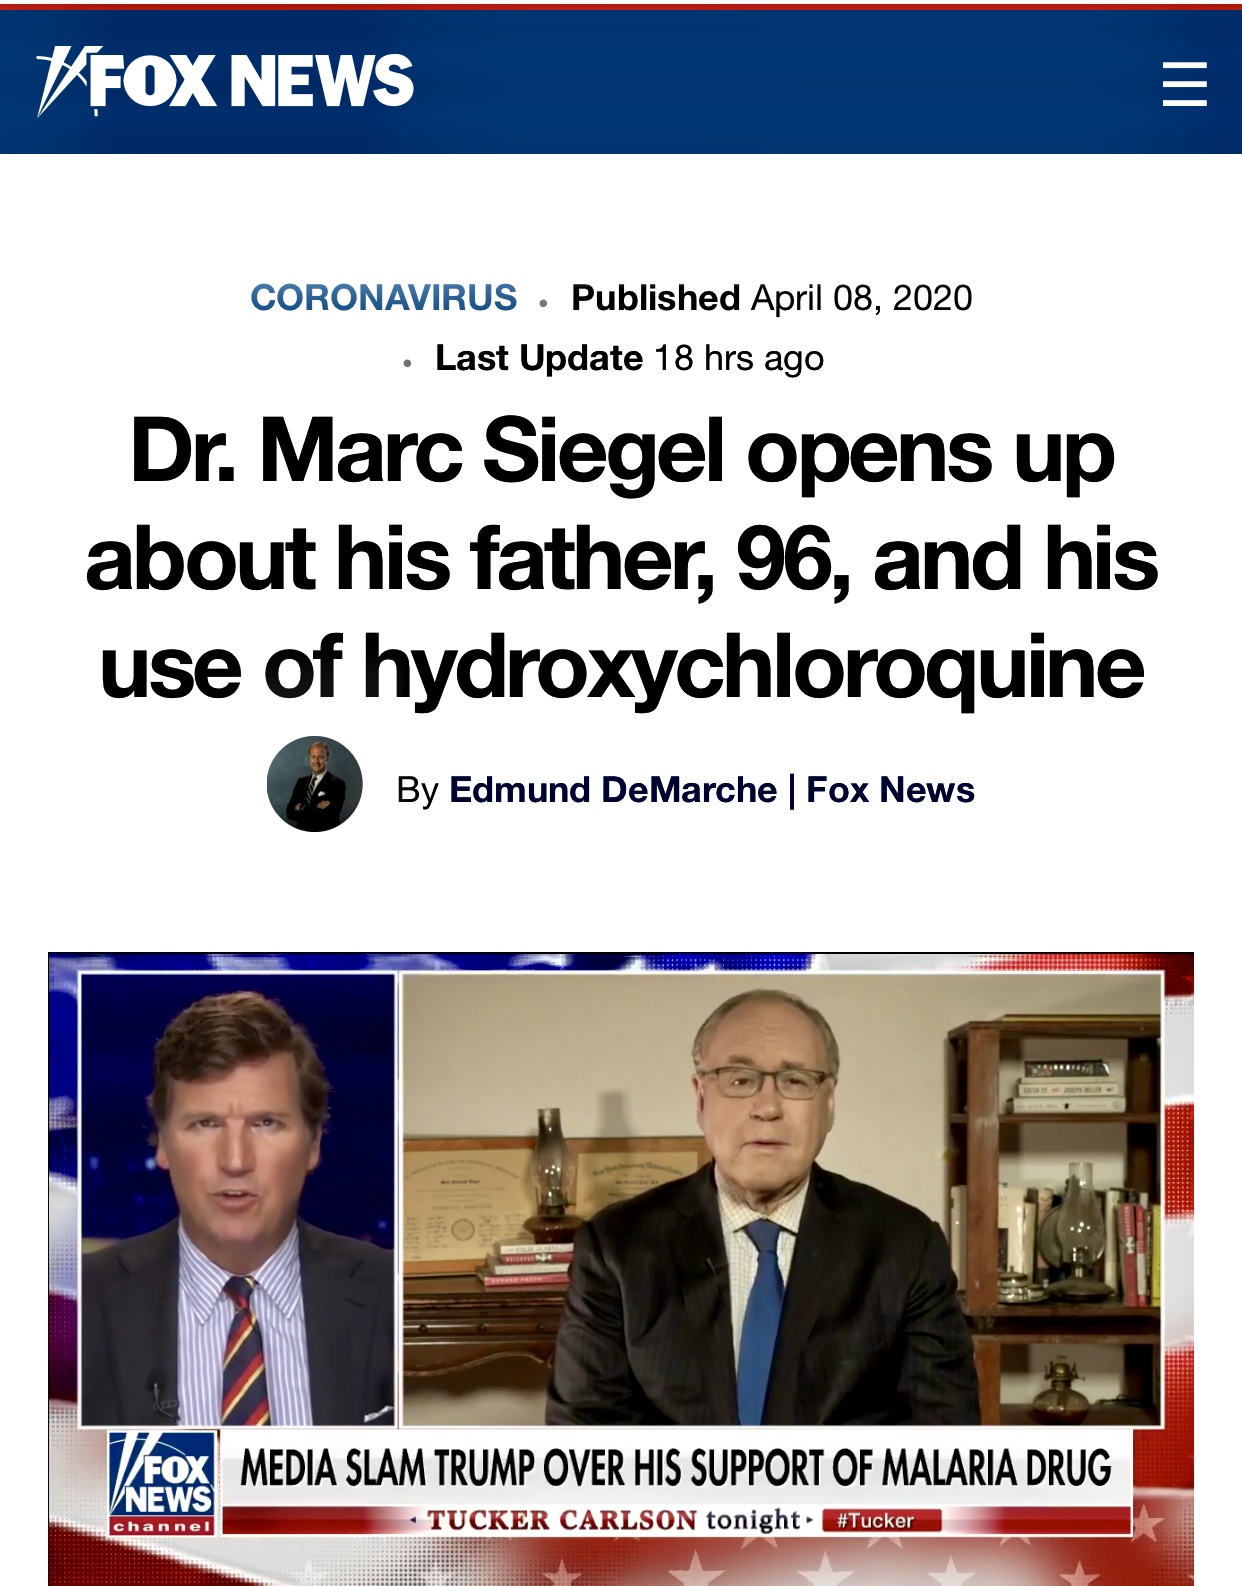 Dr. Marc Siegel Opens Up About His Father, 96, and His Use of hydroxychloroquine